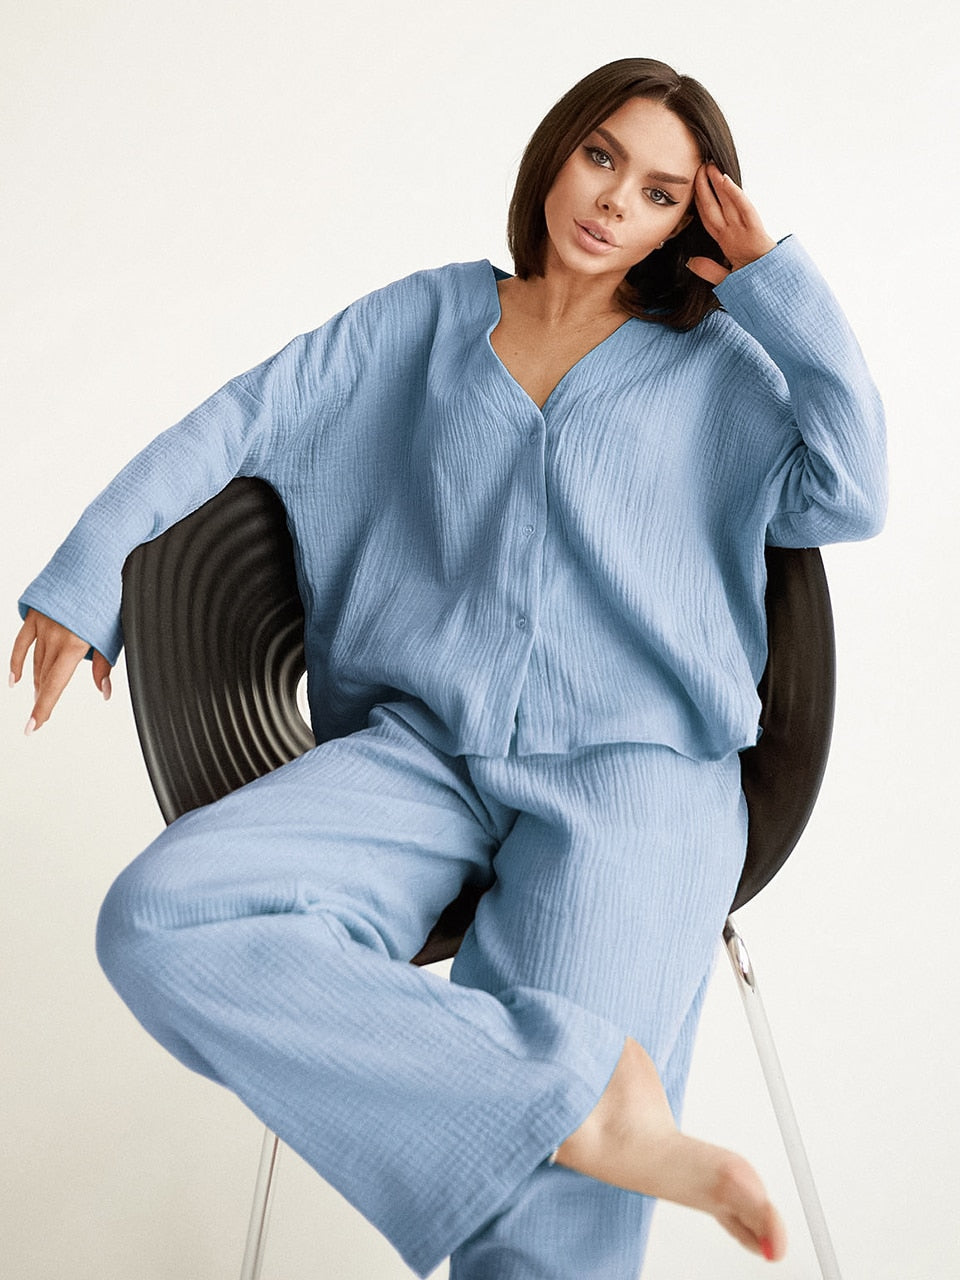 Pure Cotton Sleepwear V Neck Single Breasted Wide Leg Pants Trouser Suits Drop Sleeves Set Woman 2 Pieces Loungewear